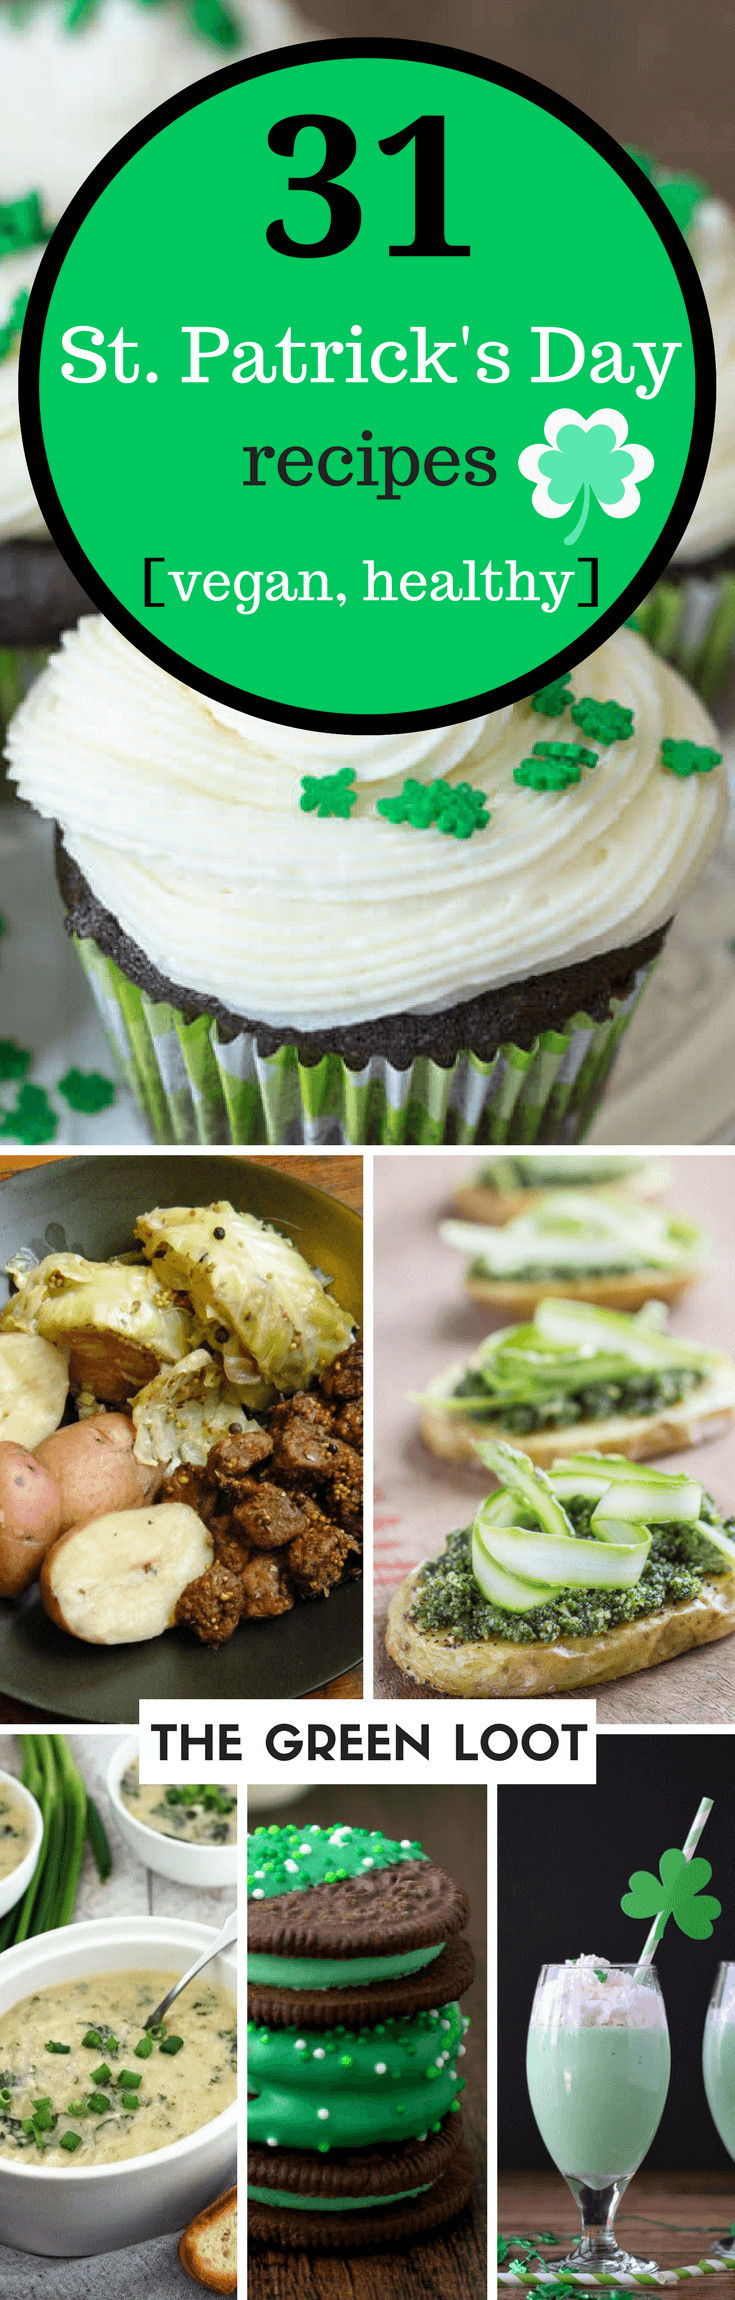 Healthy St Patrick'S Day Desserts
 22 Best Ideas Vegan St Patrick s Day Recipes Home